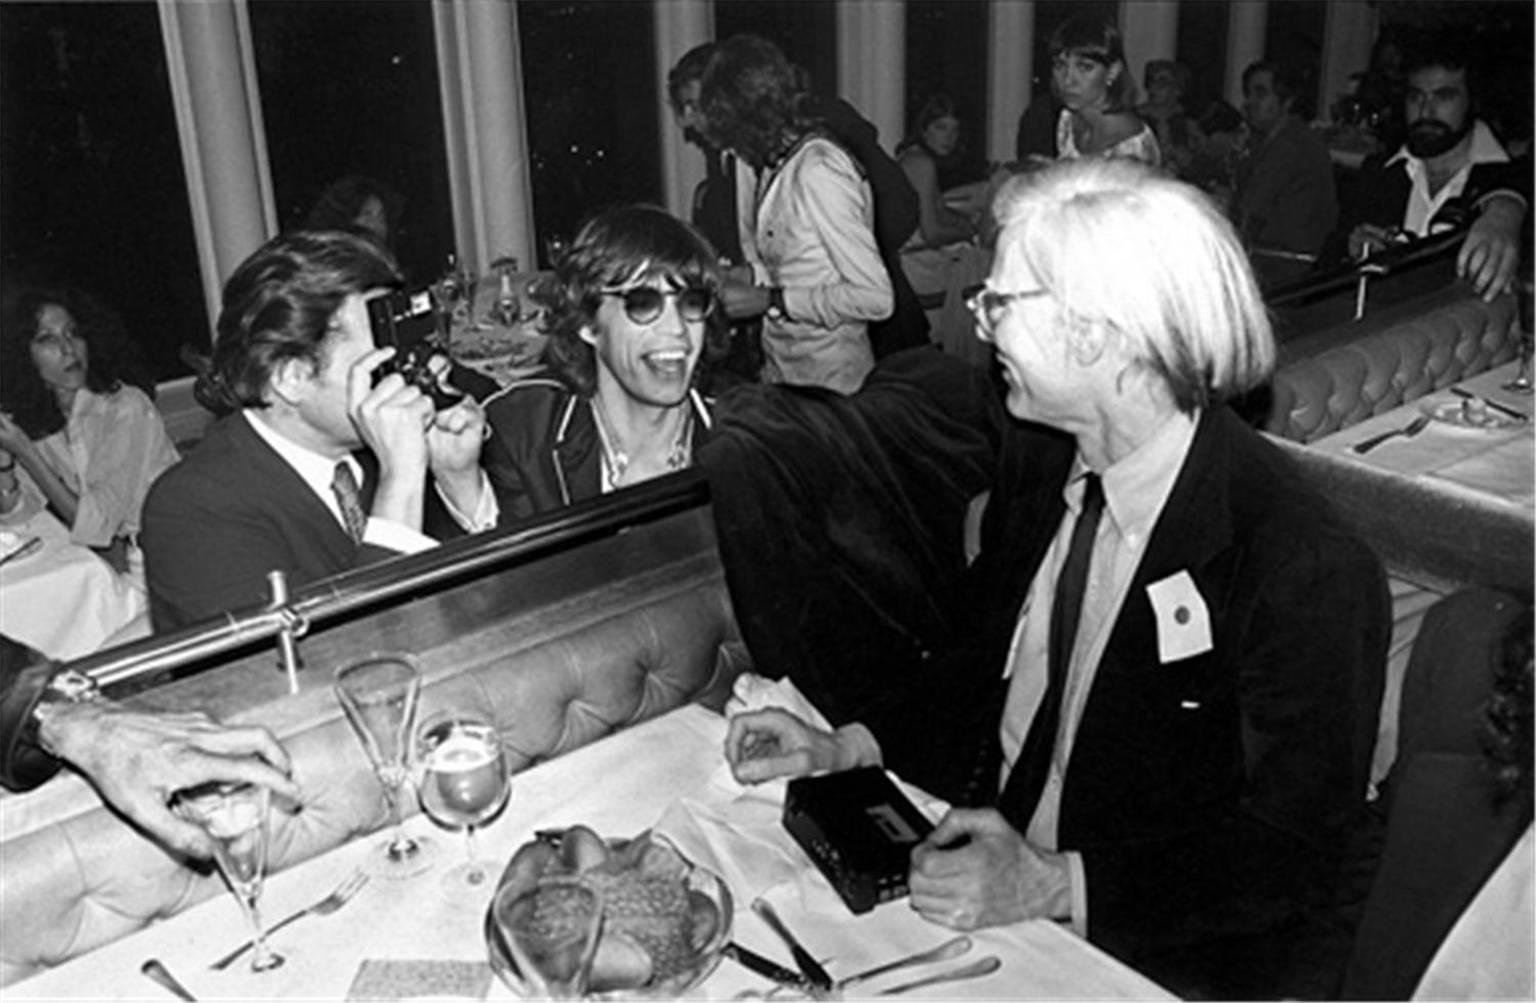 Black and White Photograph Mick Rock - Mick Jagger et Andy Warhol NYC, 1976